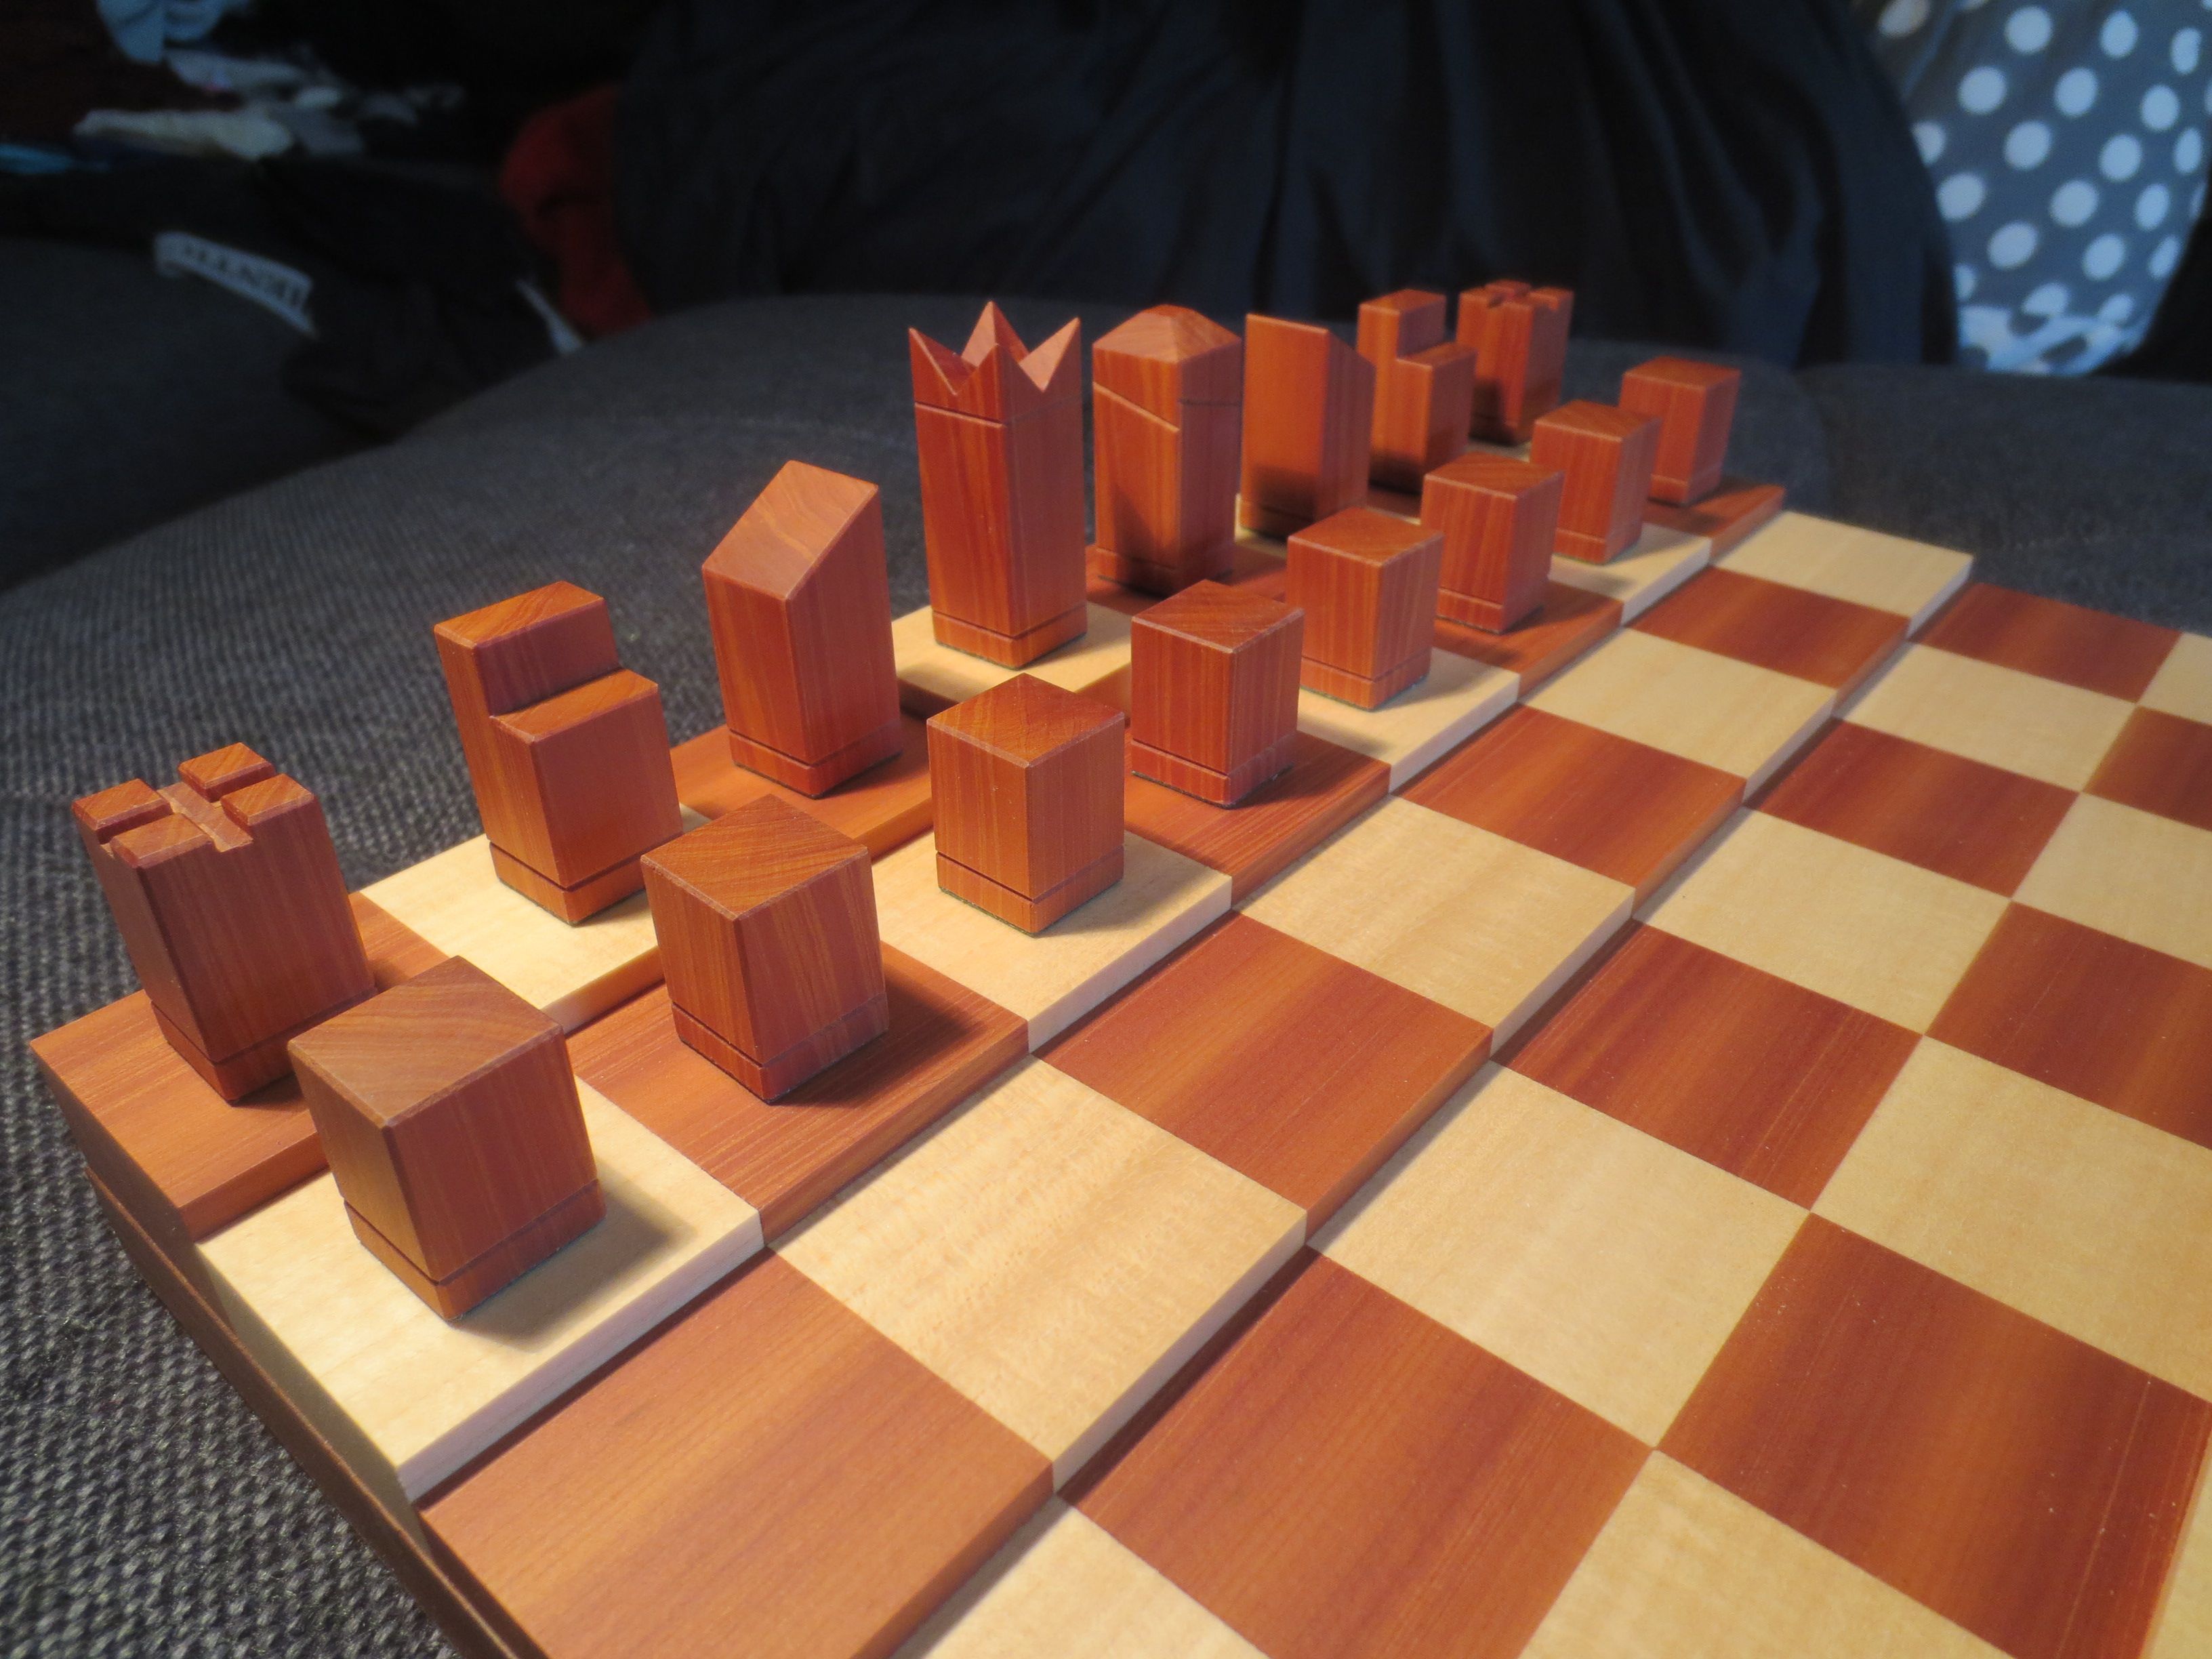 How Are Hand-Made Chess Pieces Made?